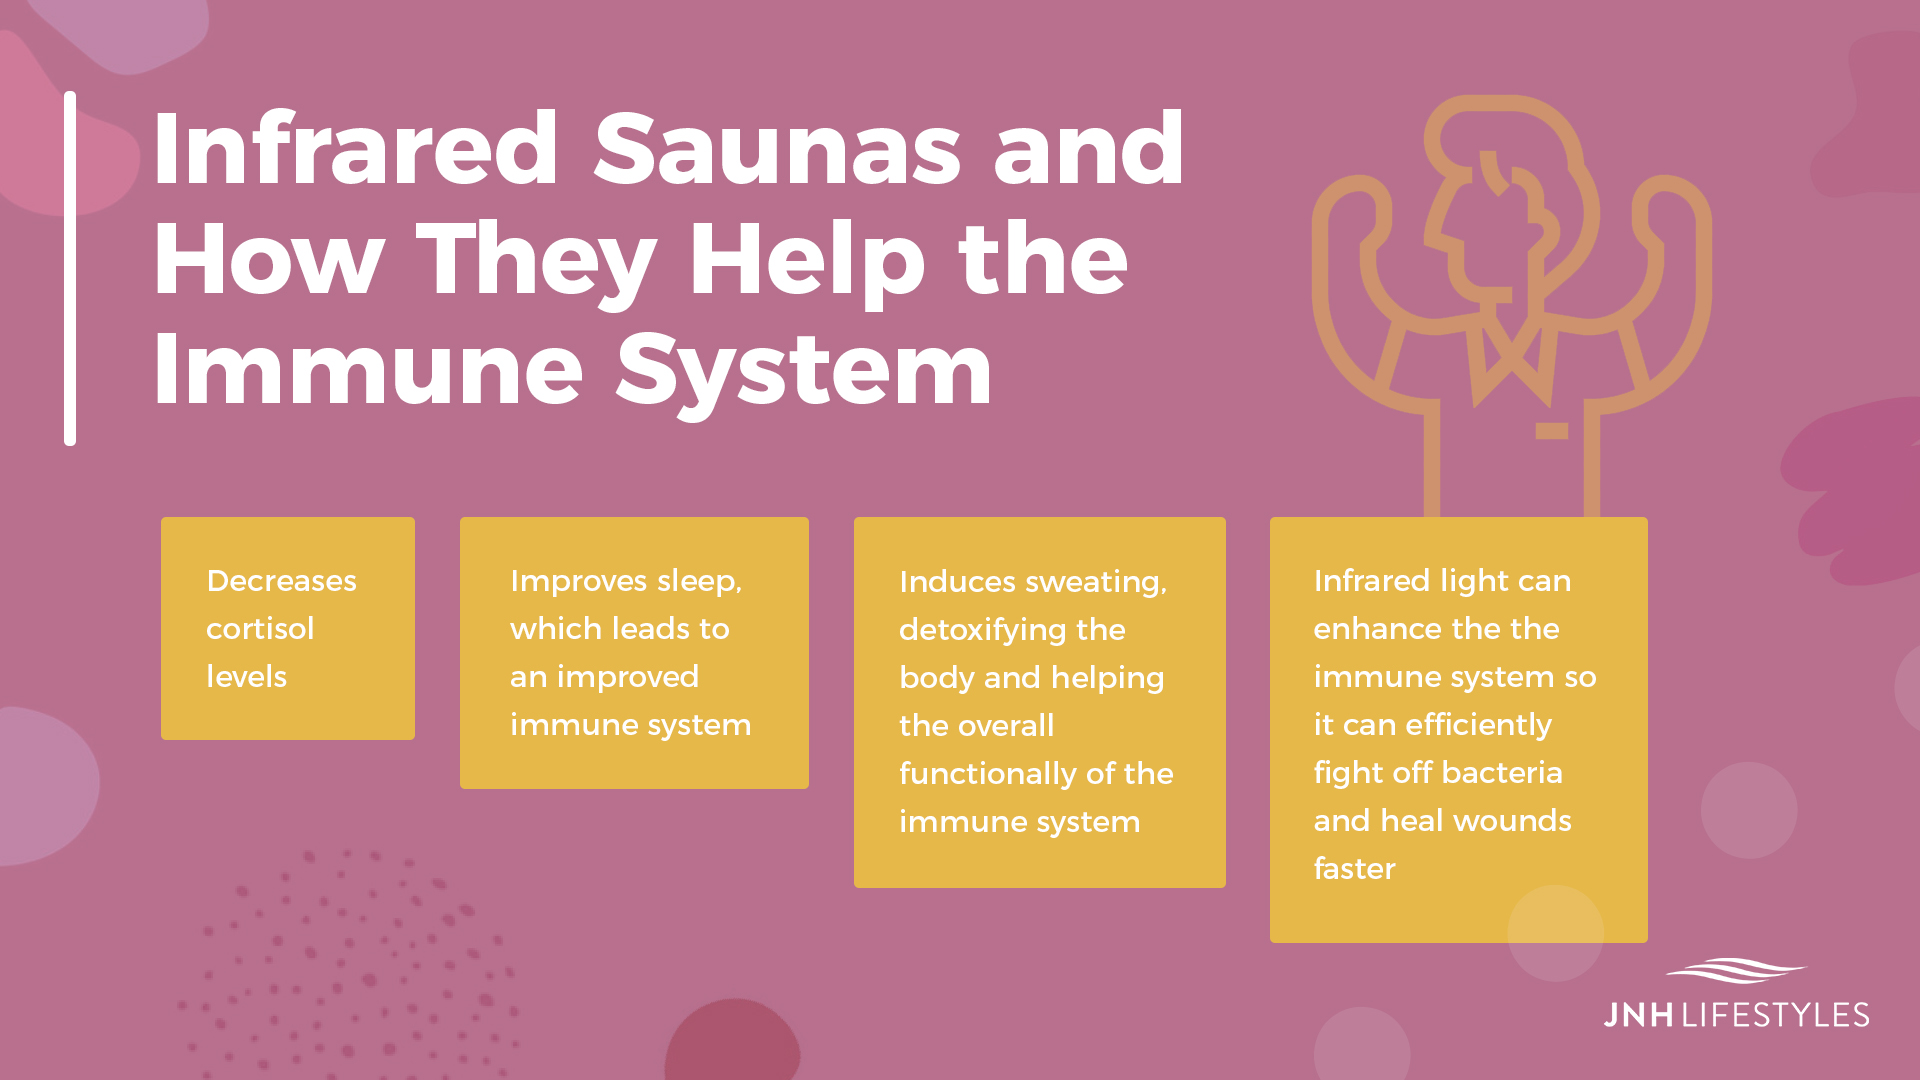 Infrared Saunas and How They Help the Immune System -Decreases cortisol levels -Improves sleep, which leads to an improved immune system -Induces sweating, detoxifying the body and helping the overall functionally of the immune system -Infrared light can enhance the the immune system so it can efficiently fight off bacteria and heal wounds faster